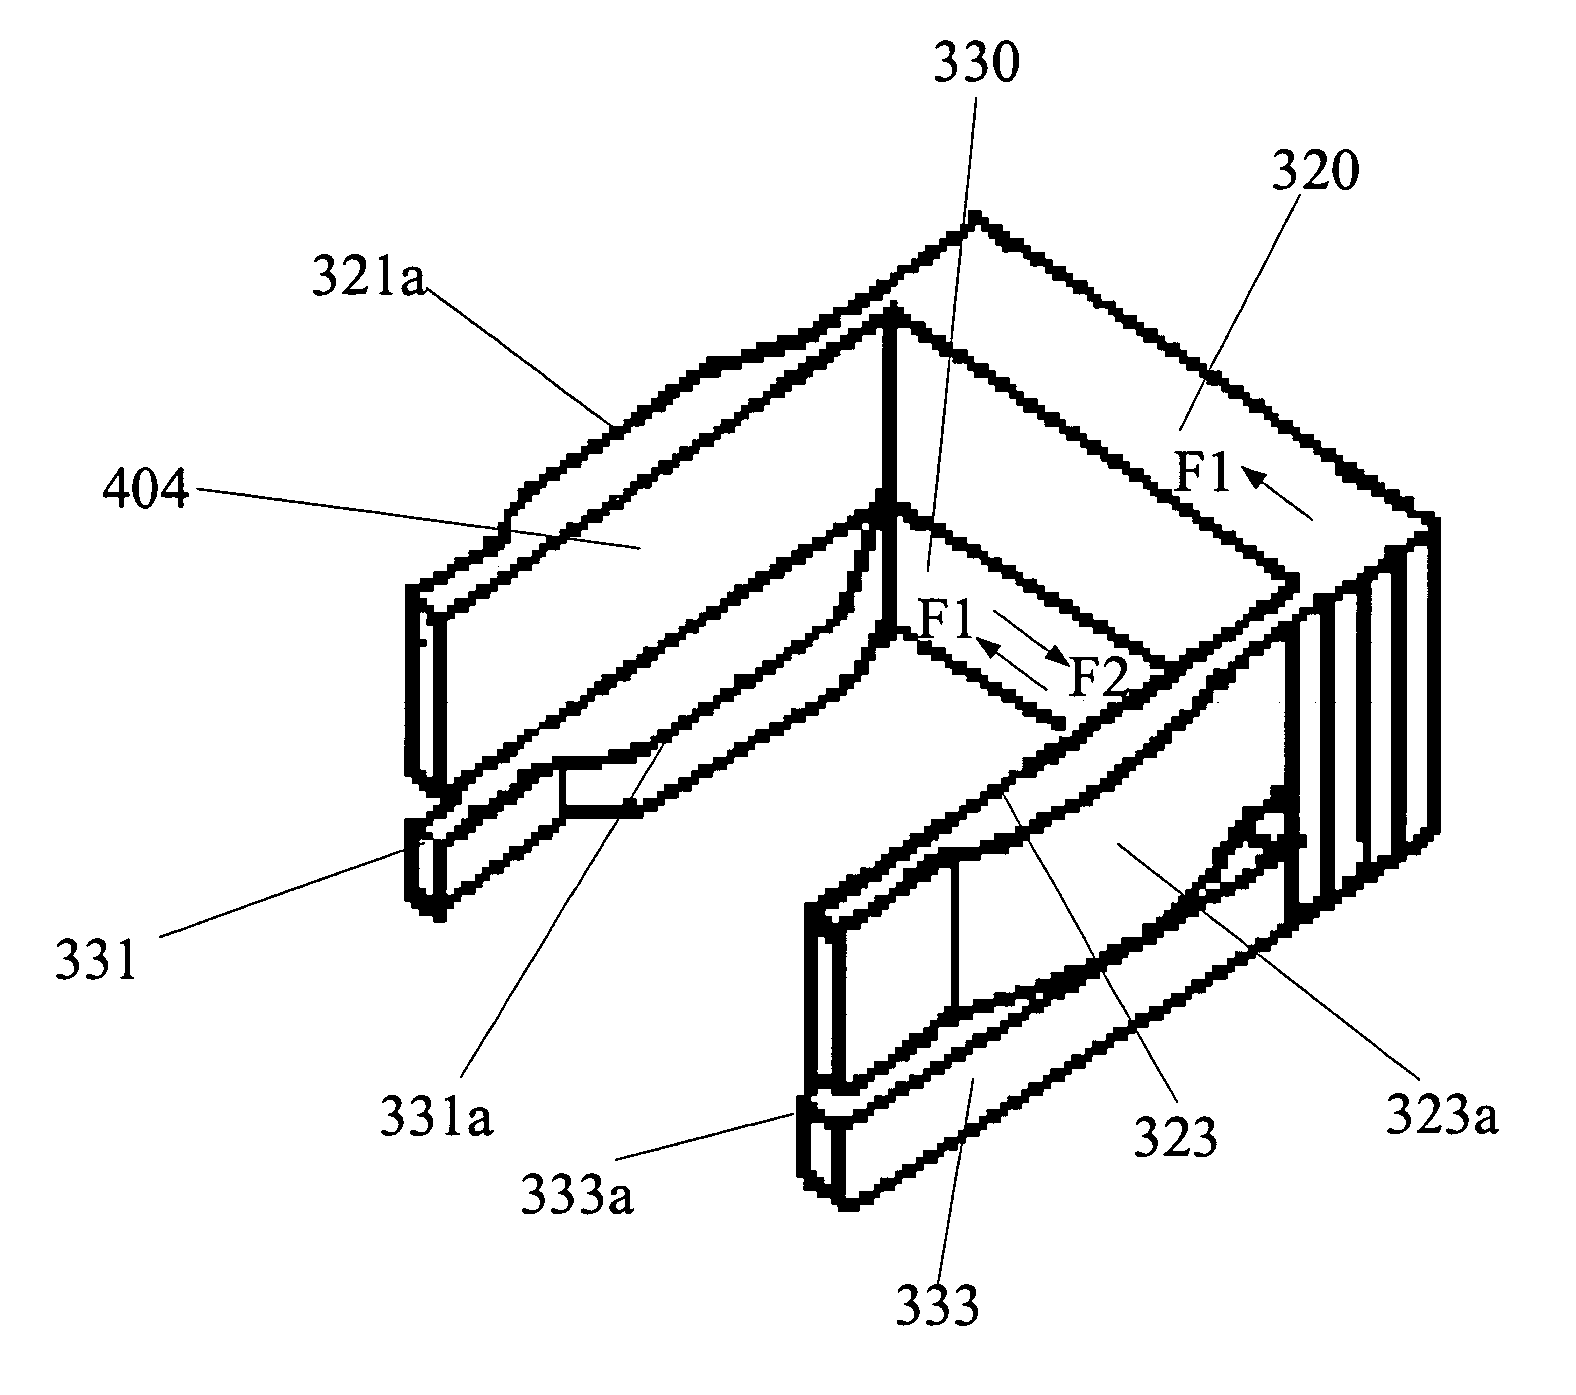 Micro-actuator unit, head gimbal assembly, and disk drive unit with vibration canceller